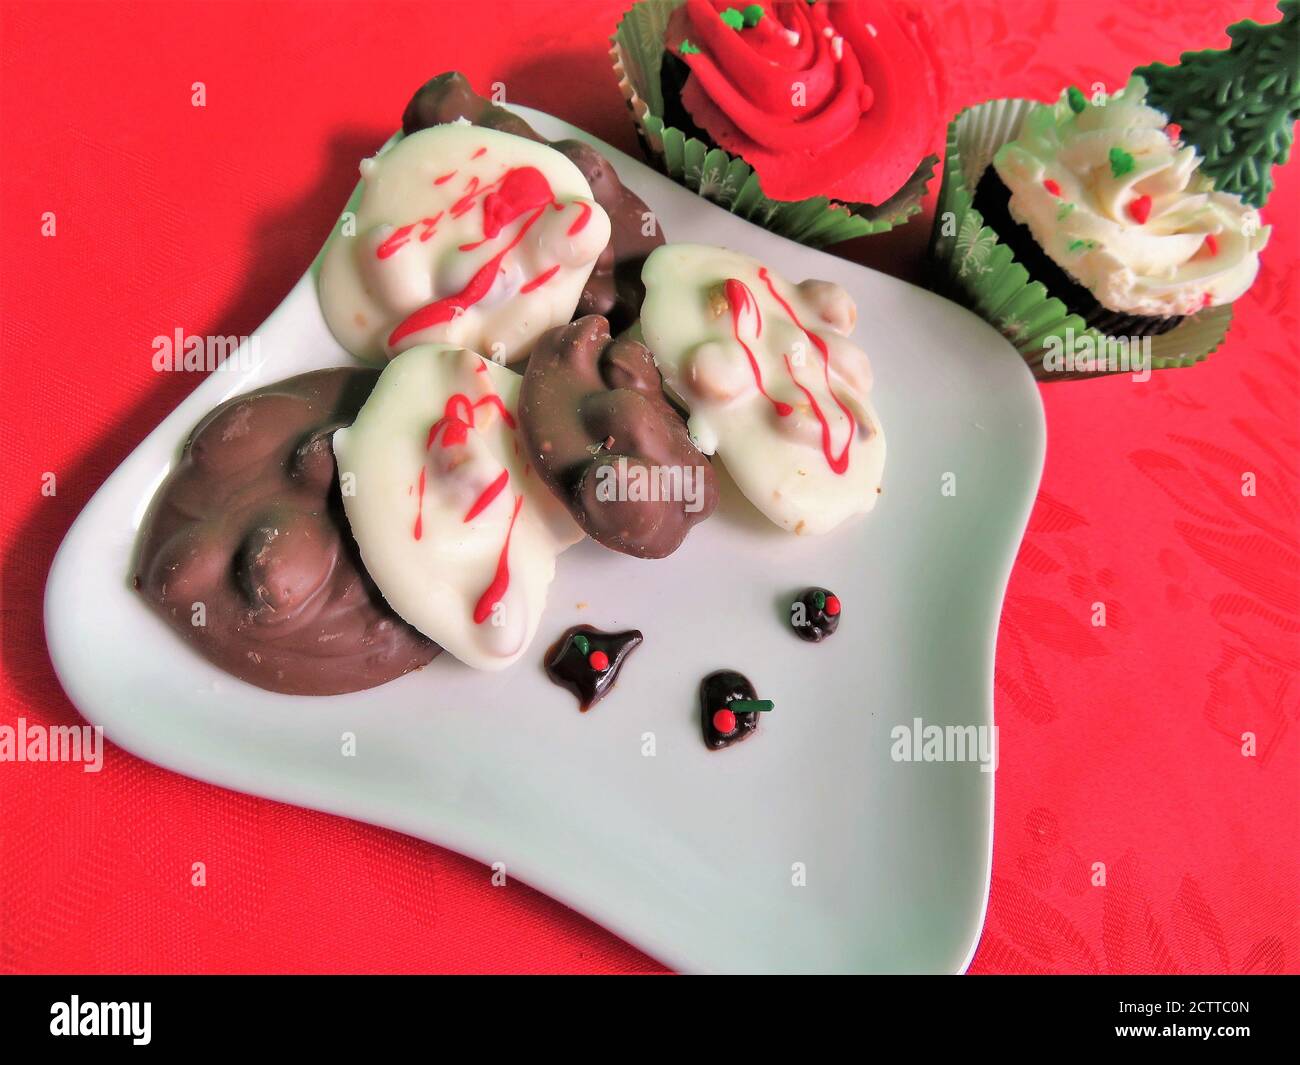 Chocolate covered peanut candy for the Christmas holiday season Stock Photo